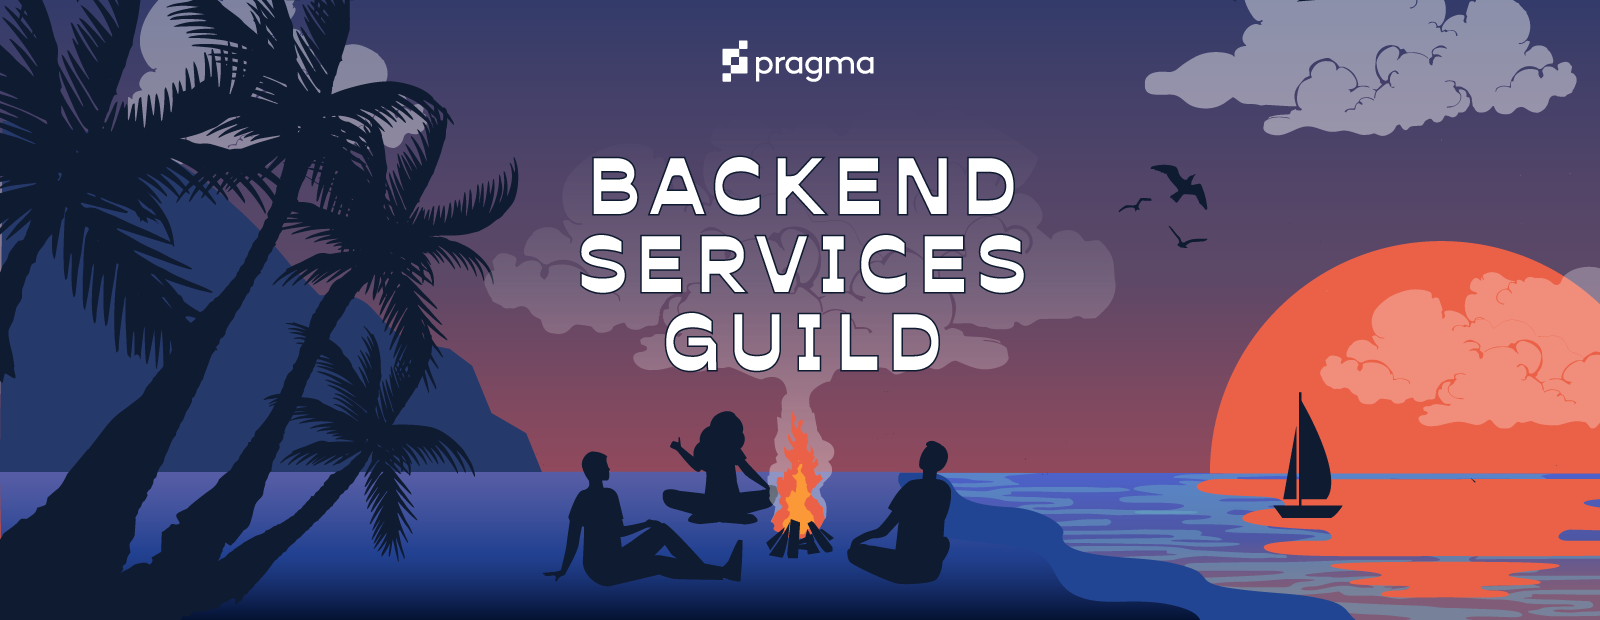 Apply to Join the Backend Services Guild!